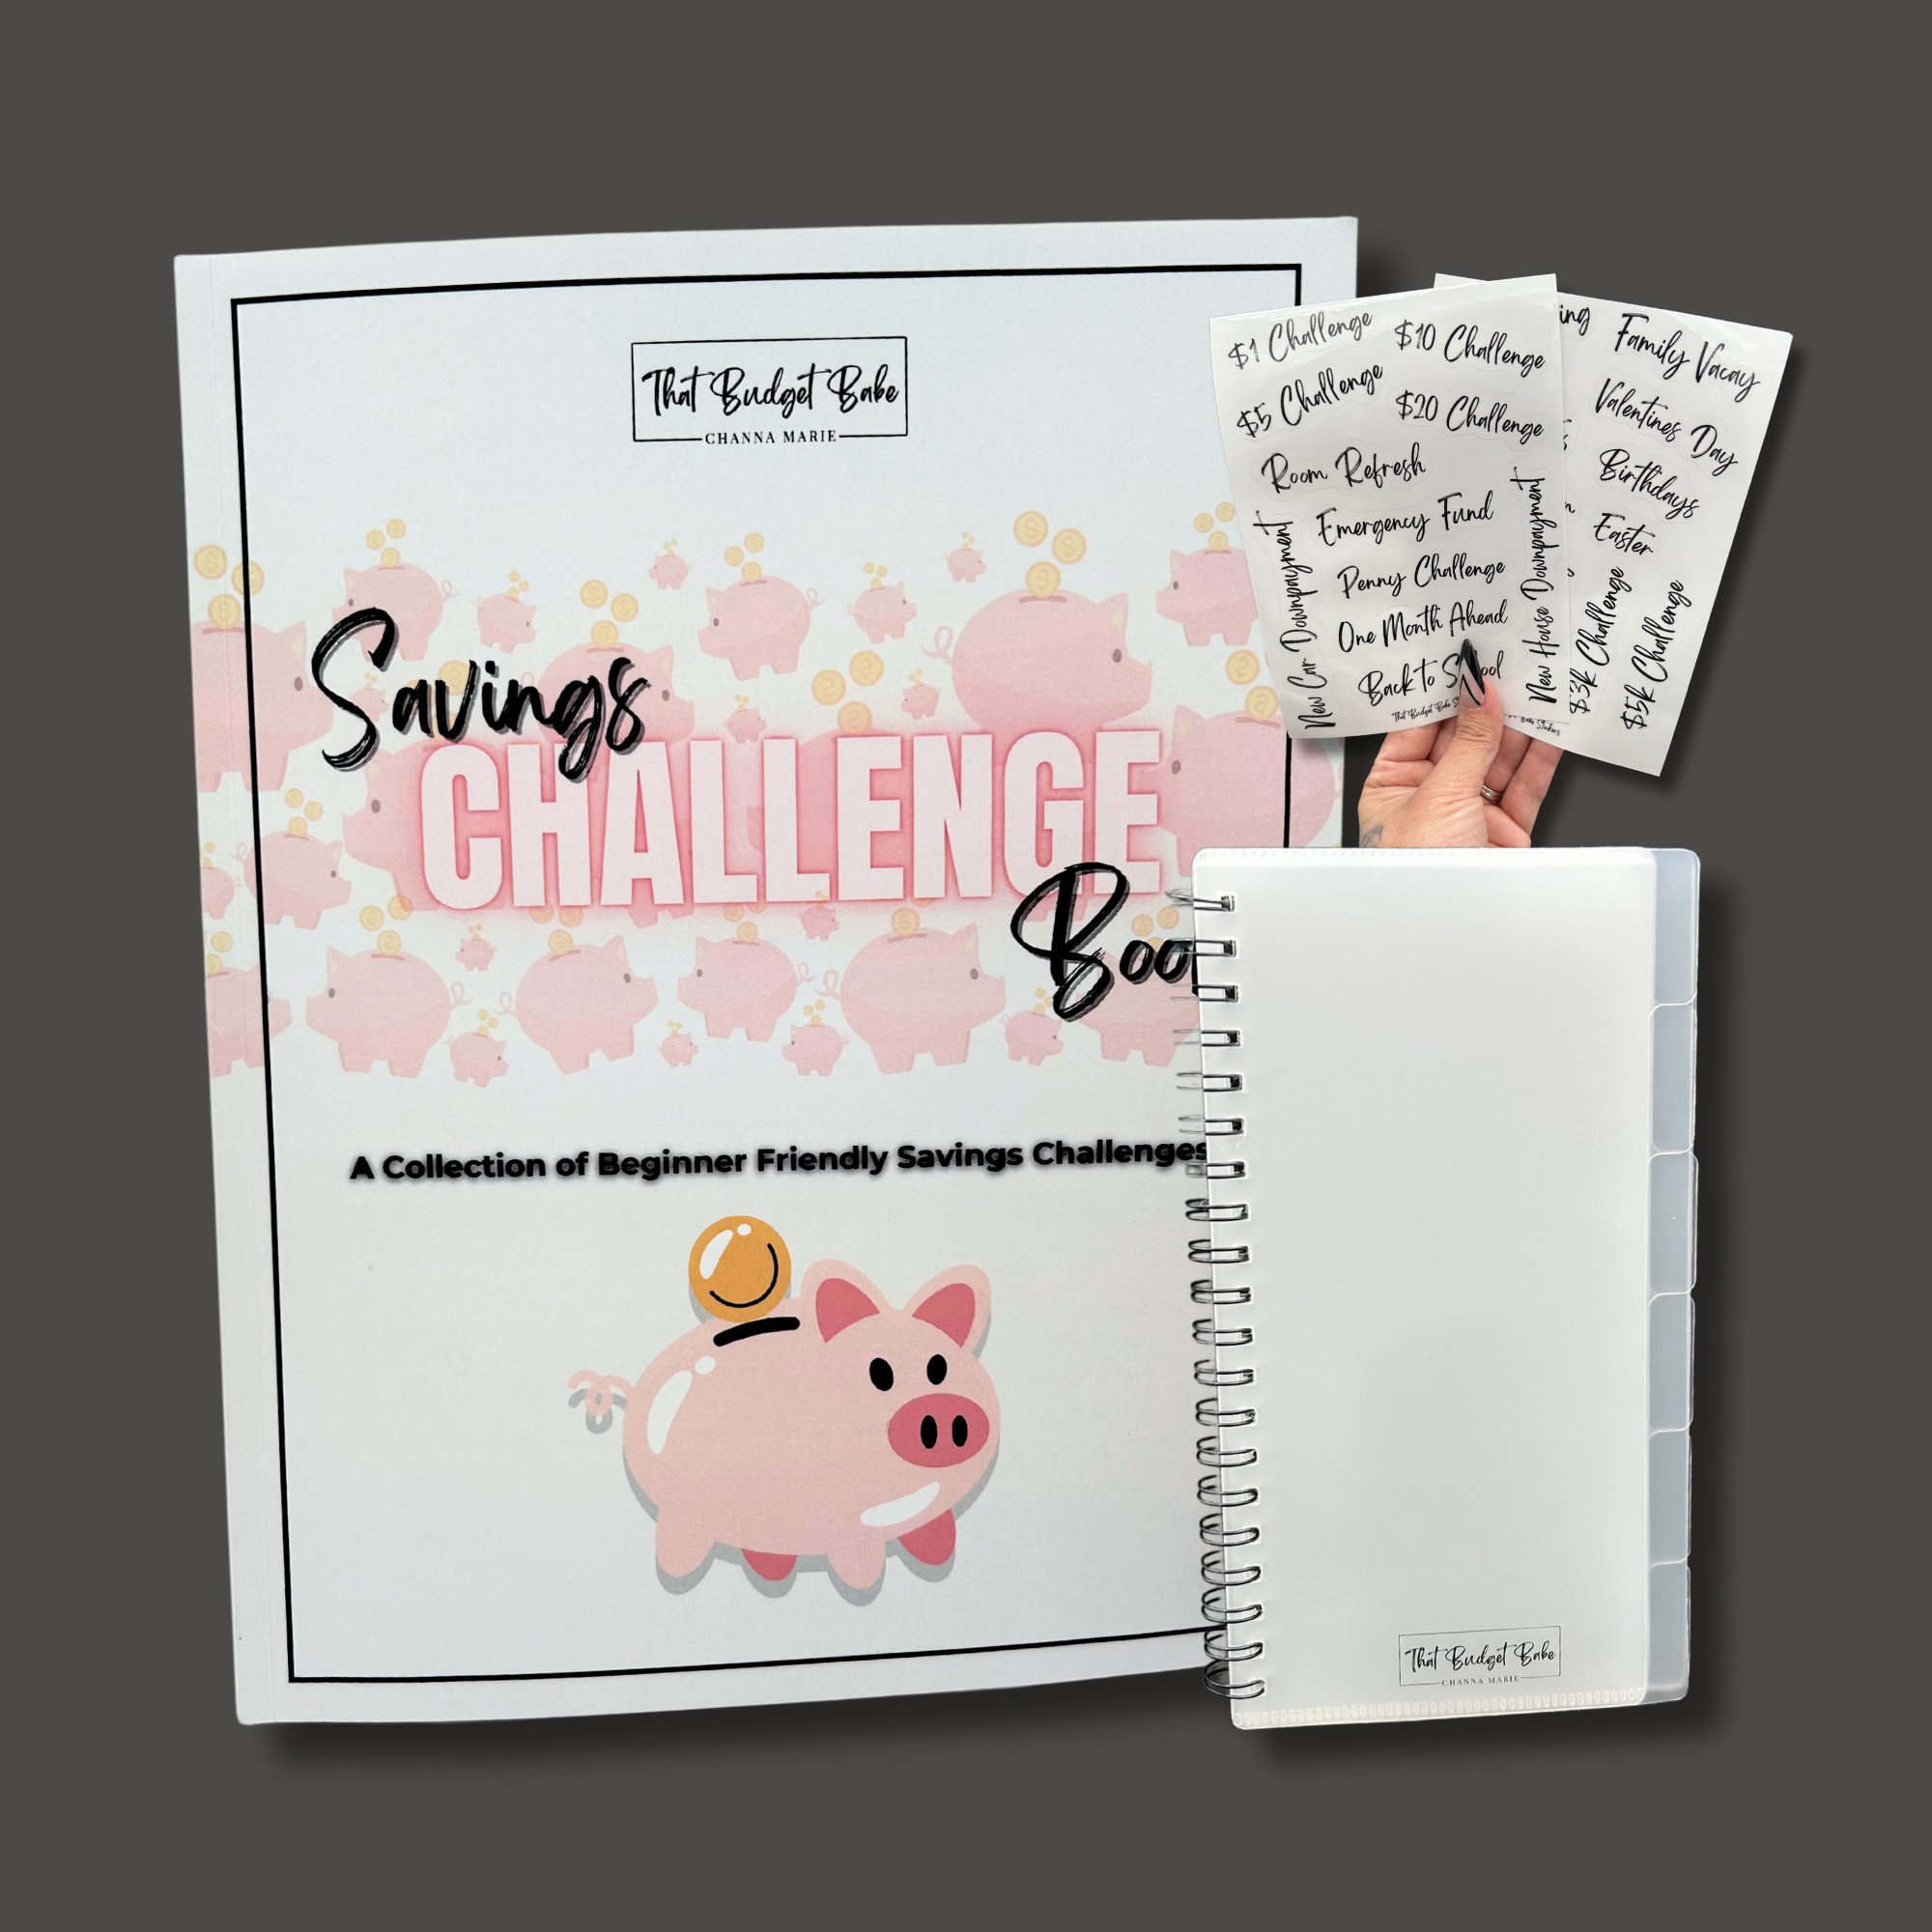 Budget Planner Coloring Book